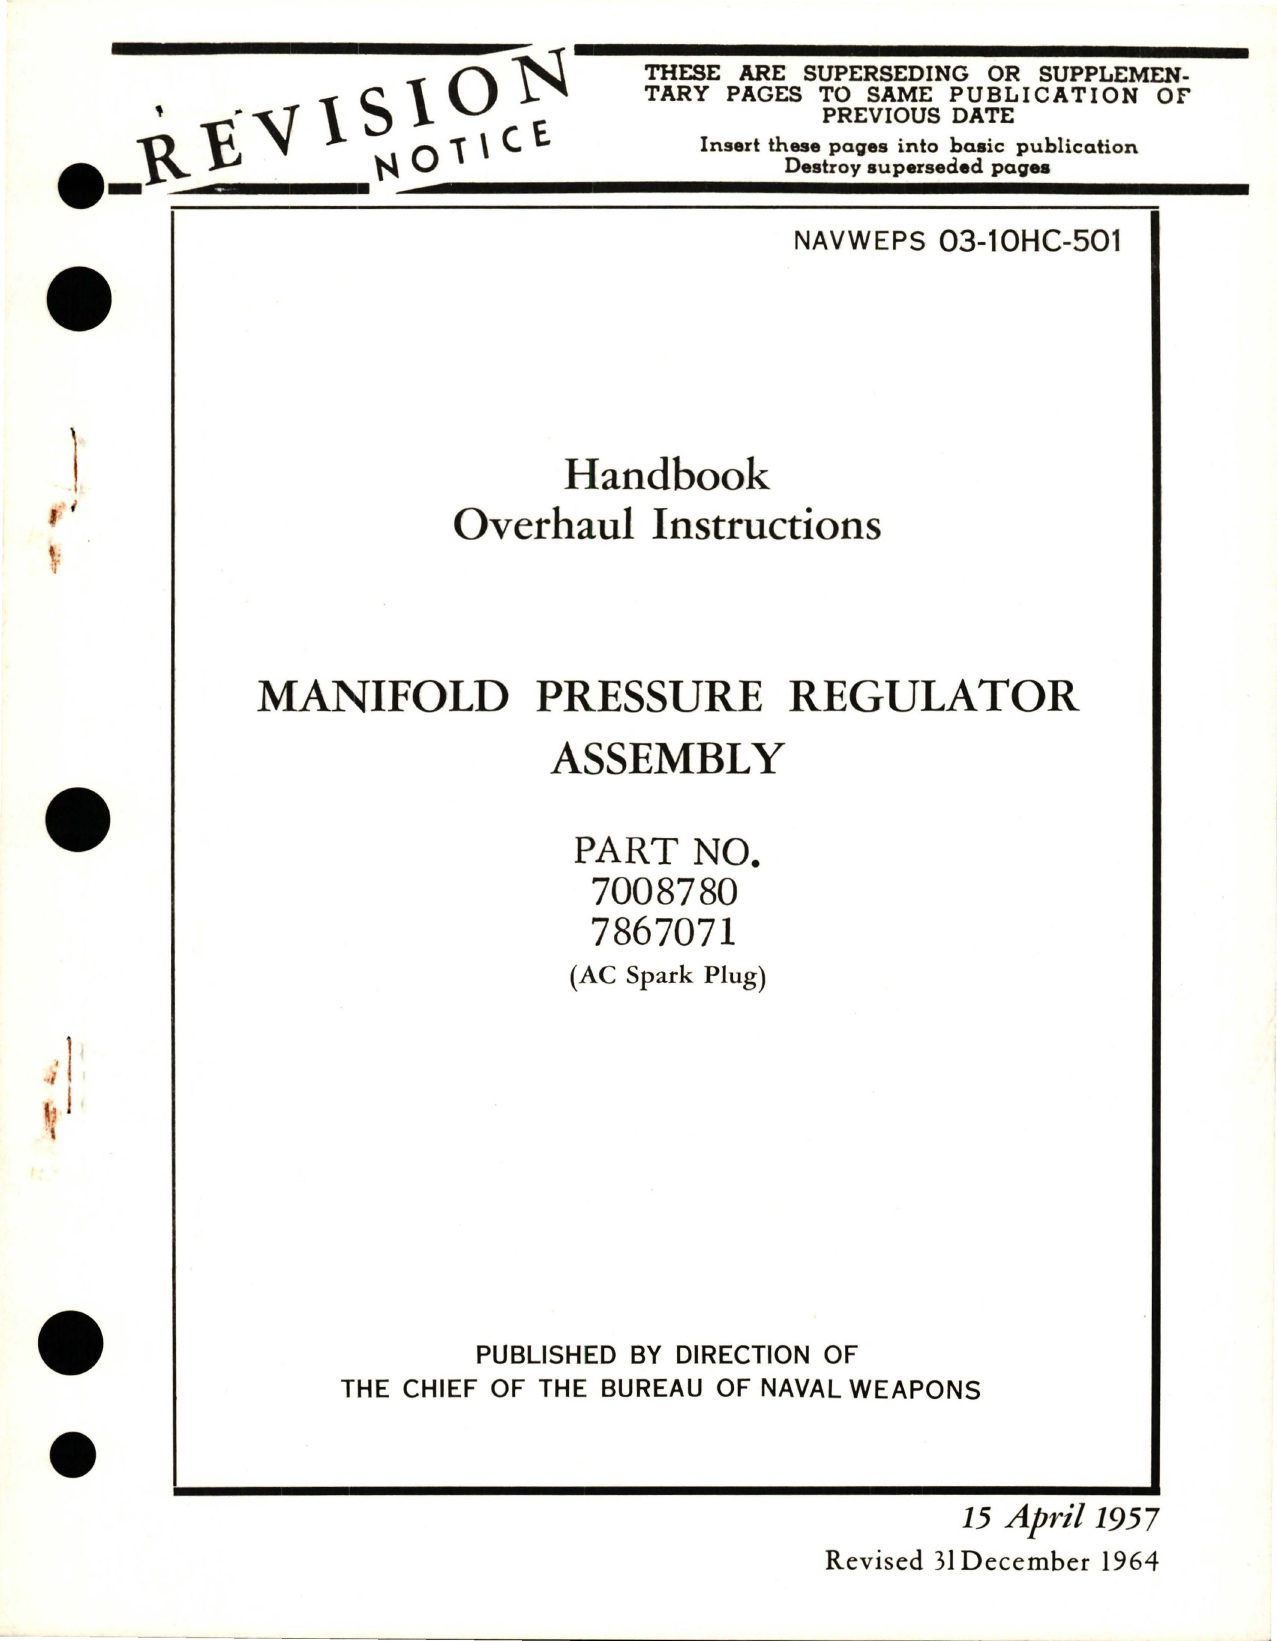 Sample page 1 from AirCorps Library document: Overhaul Instructions for Manifold Pressure Regulator Assembly - Part 7008780 and 7867071